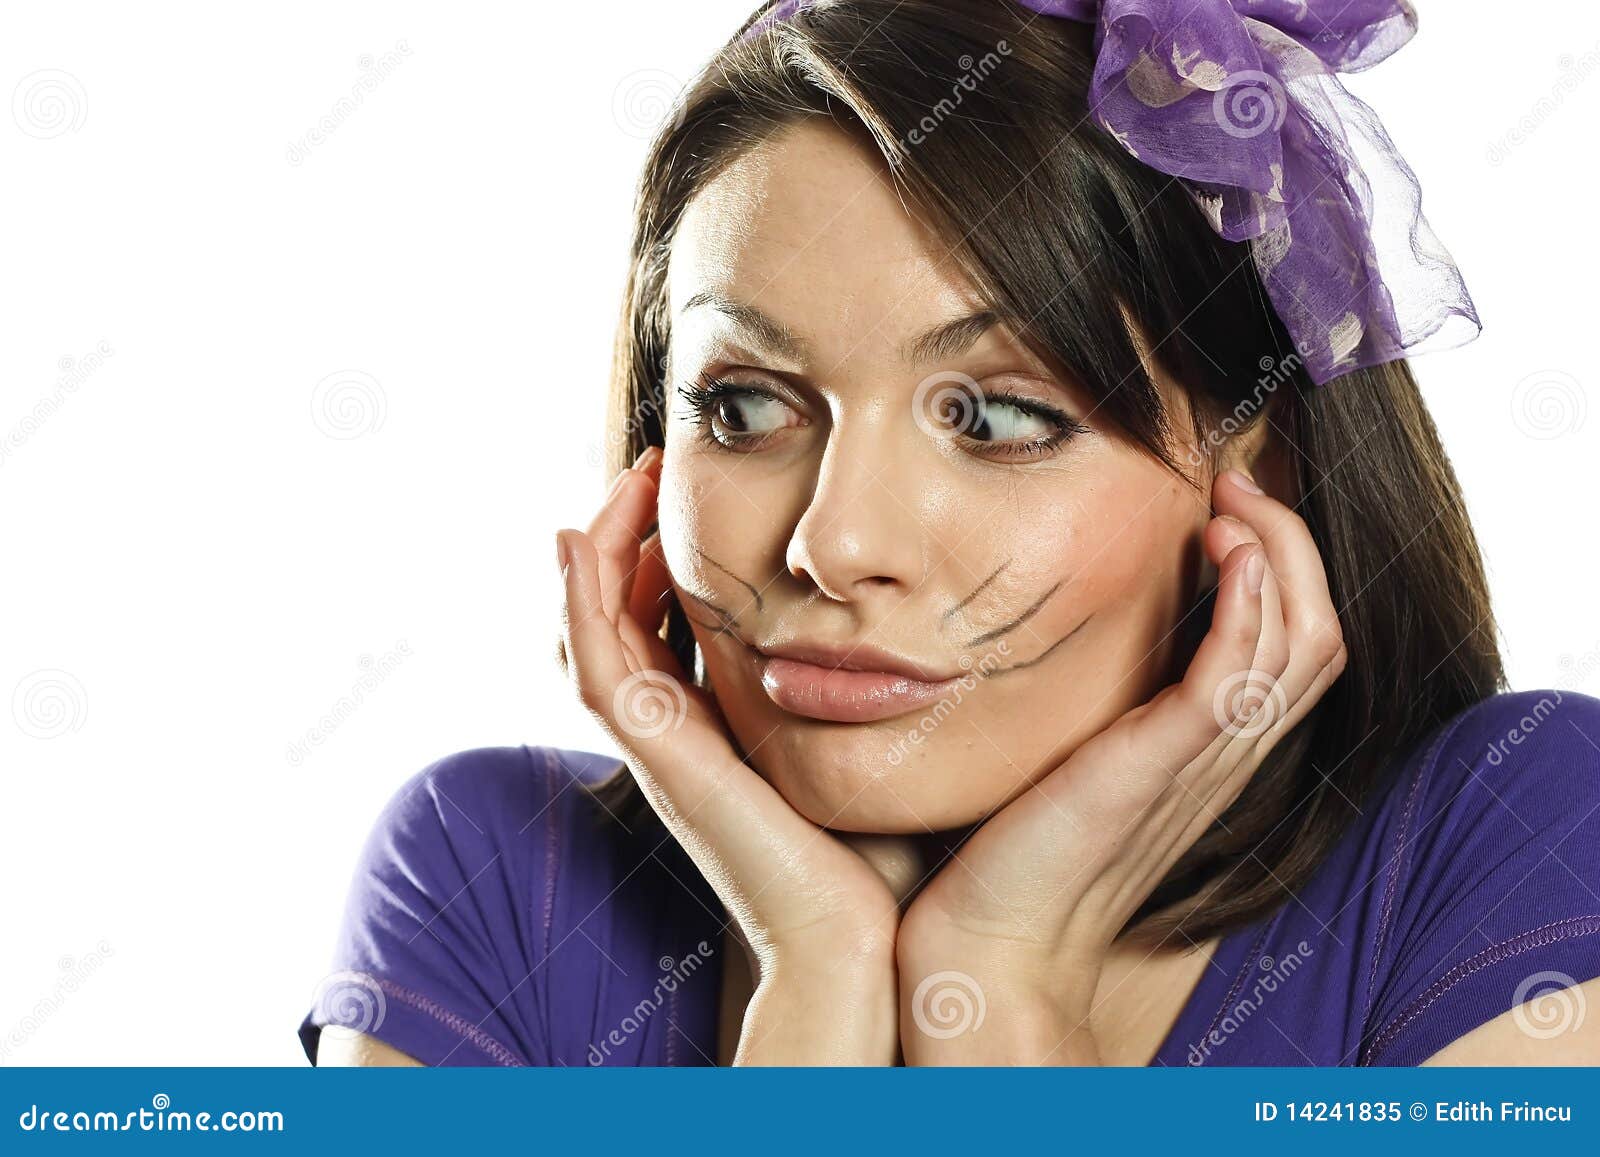 Beautiful Girl With Cat Whiskers  Stock Image Image of 